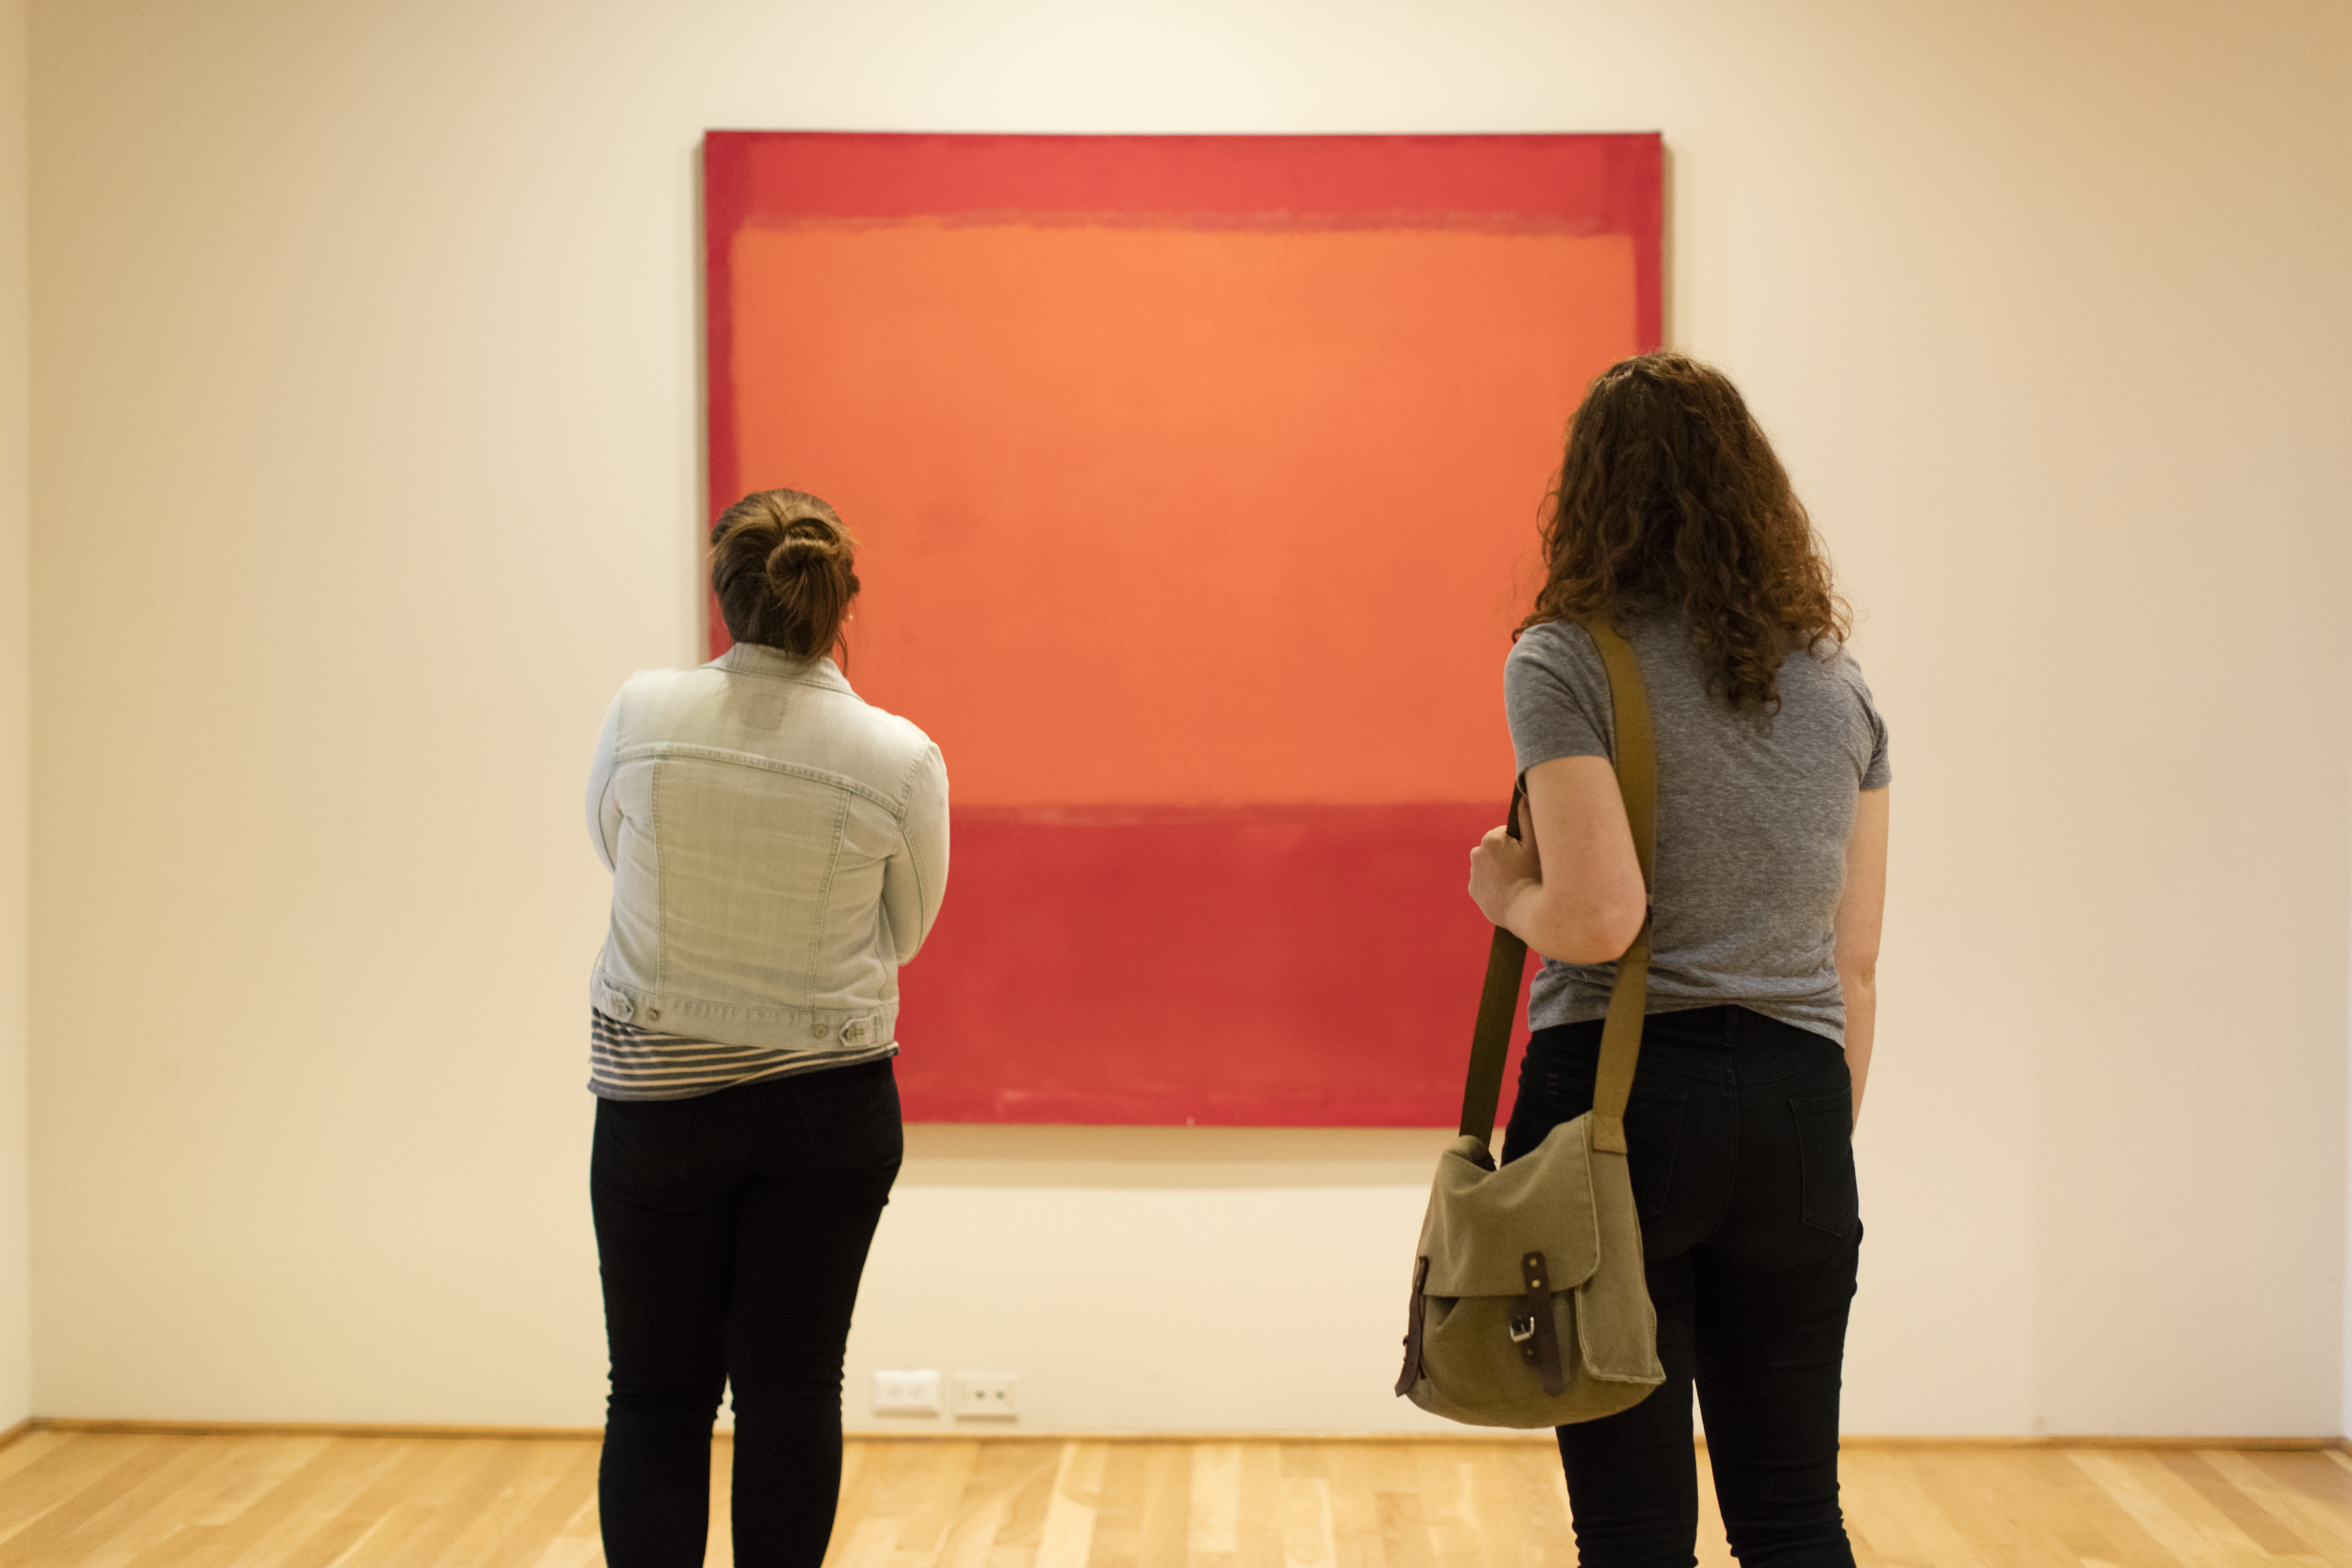 Two Gallatin students looking at a red and orange Rothko artwork in a gallery.